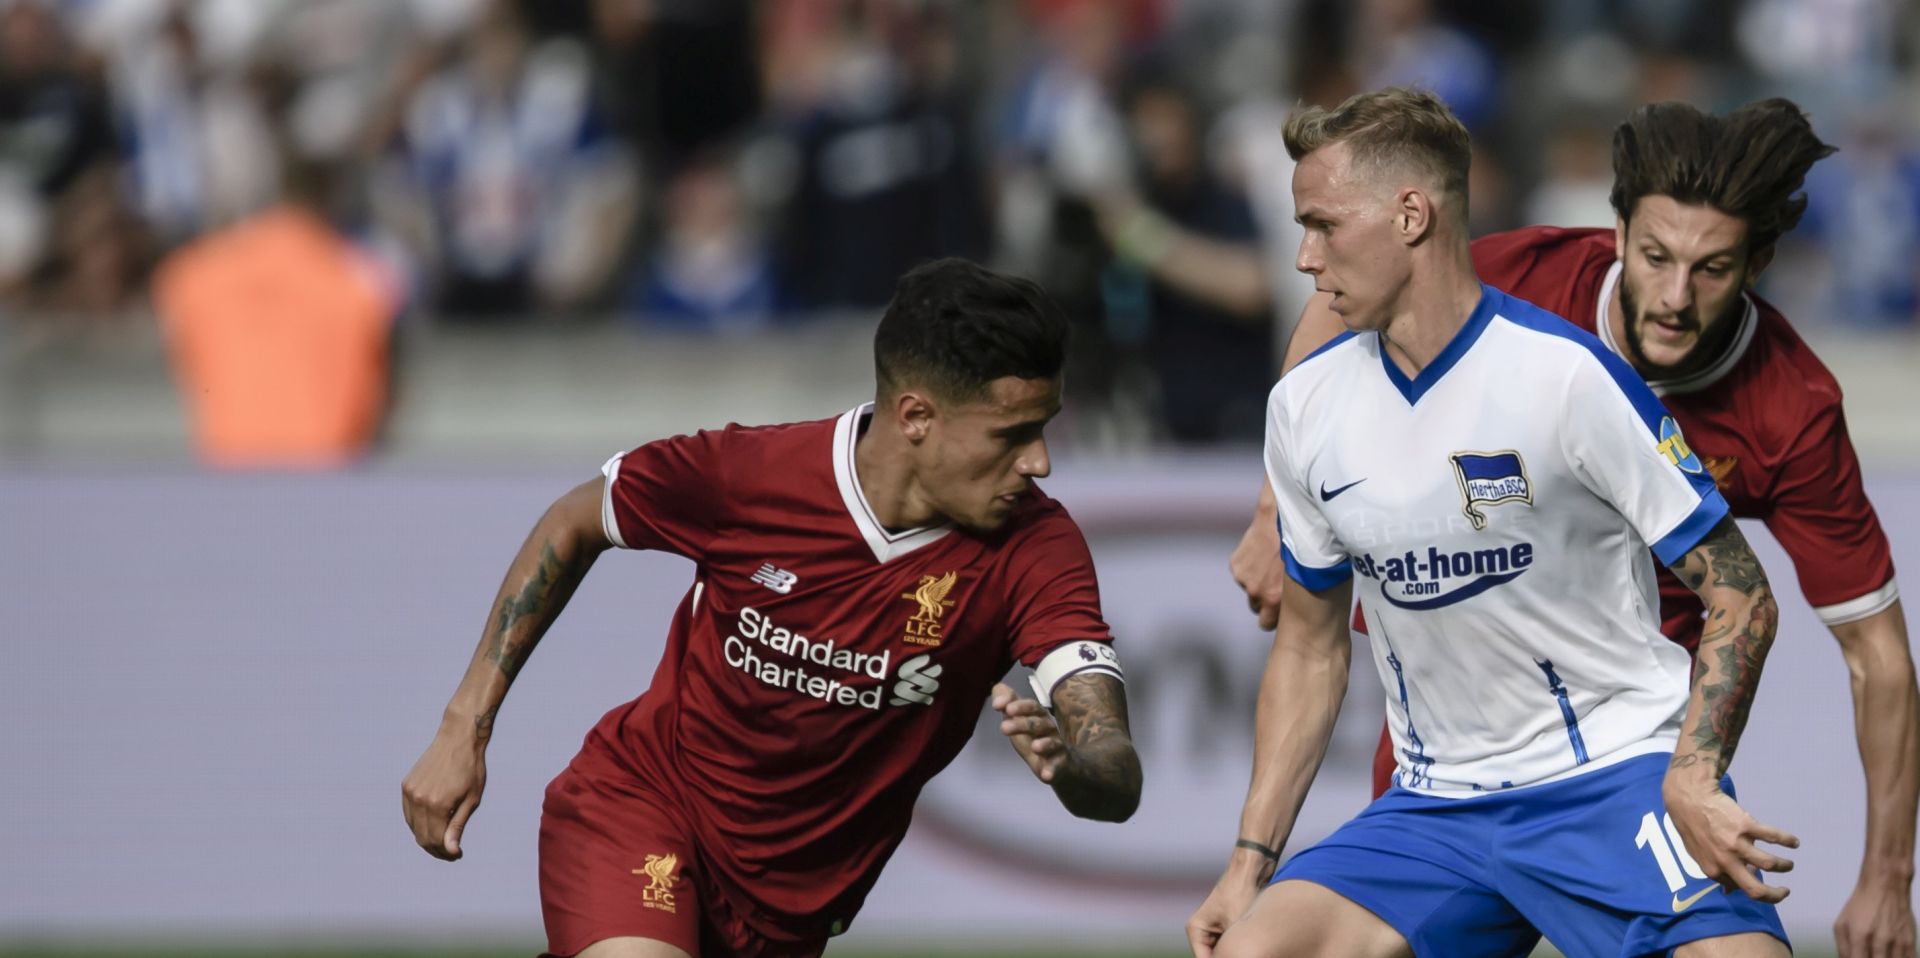 epa06116425 Liverpool’s Philippe Coutinho (L) and Liverpool’s Adam Lallana (R) in action against Berlin's Ondrej Duda during the pre-season friendly between Hertha BSC and Liverpool FC in Berlin, Germany, 29 July 2017.  EPA/CLEMENS BILAN